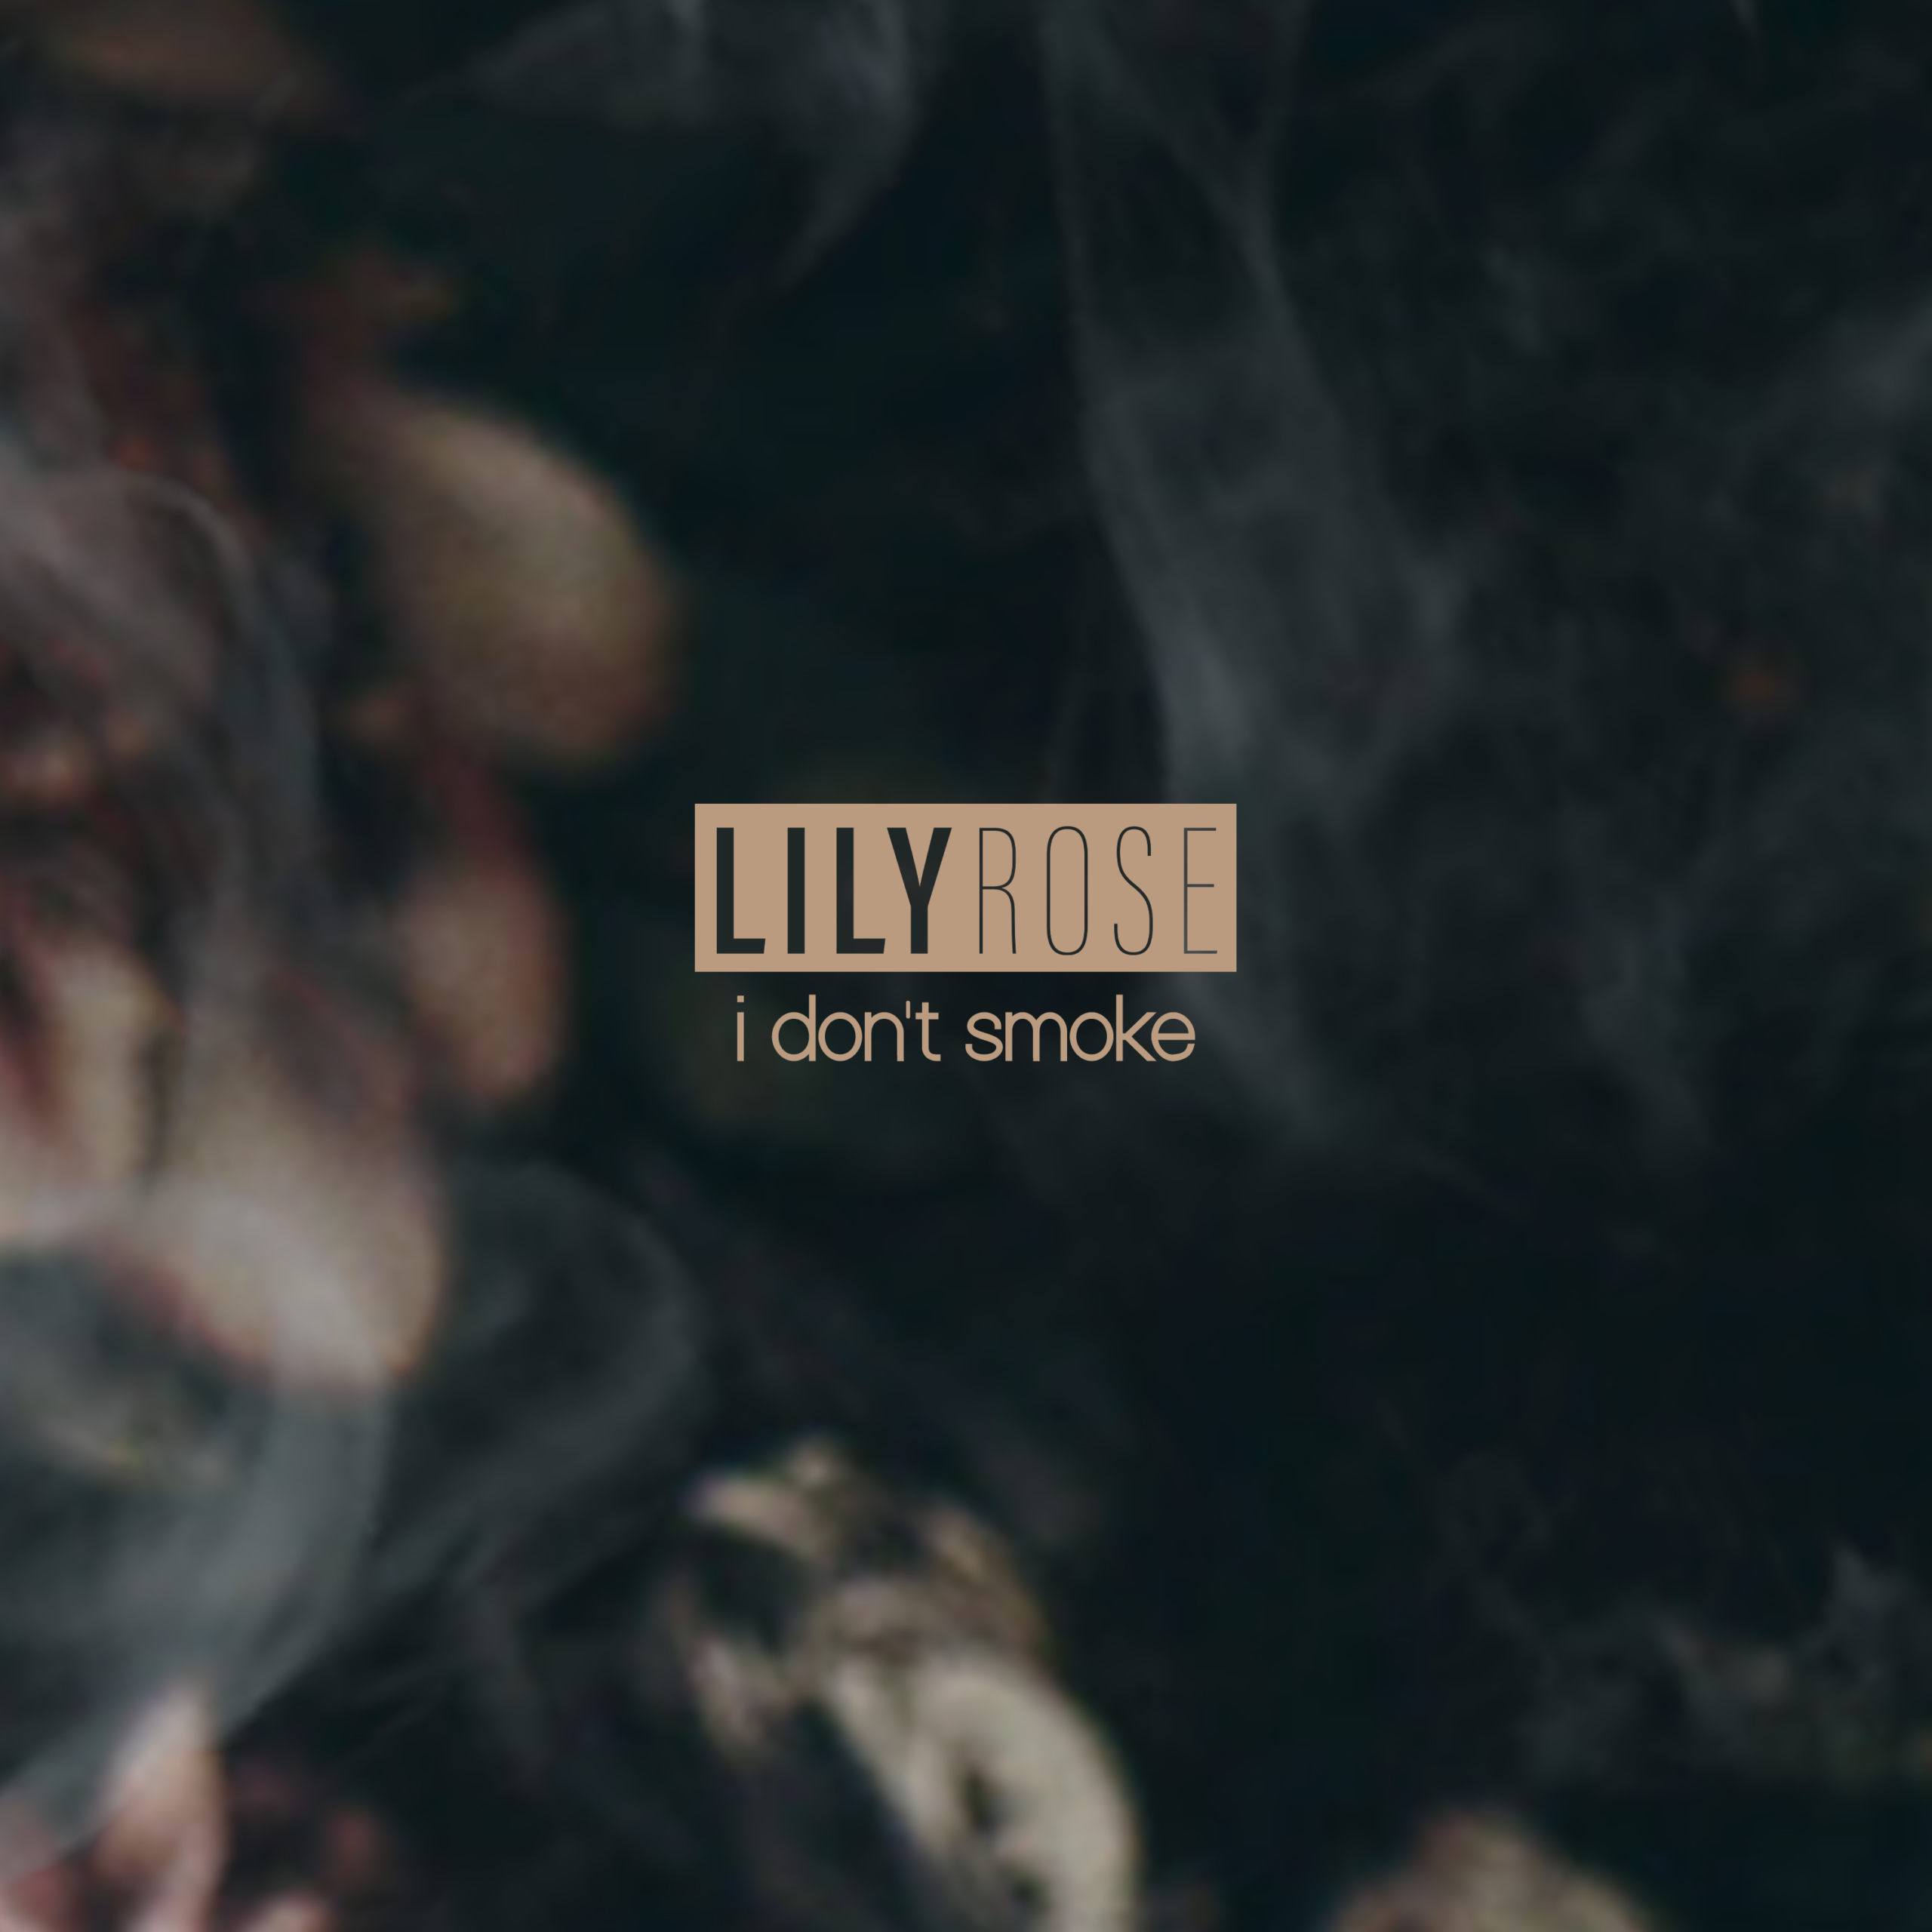 Lily Rose's new song "I Don't Smoke" is out now, September 3rd